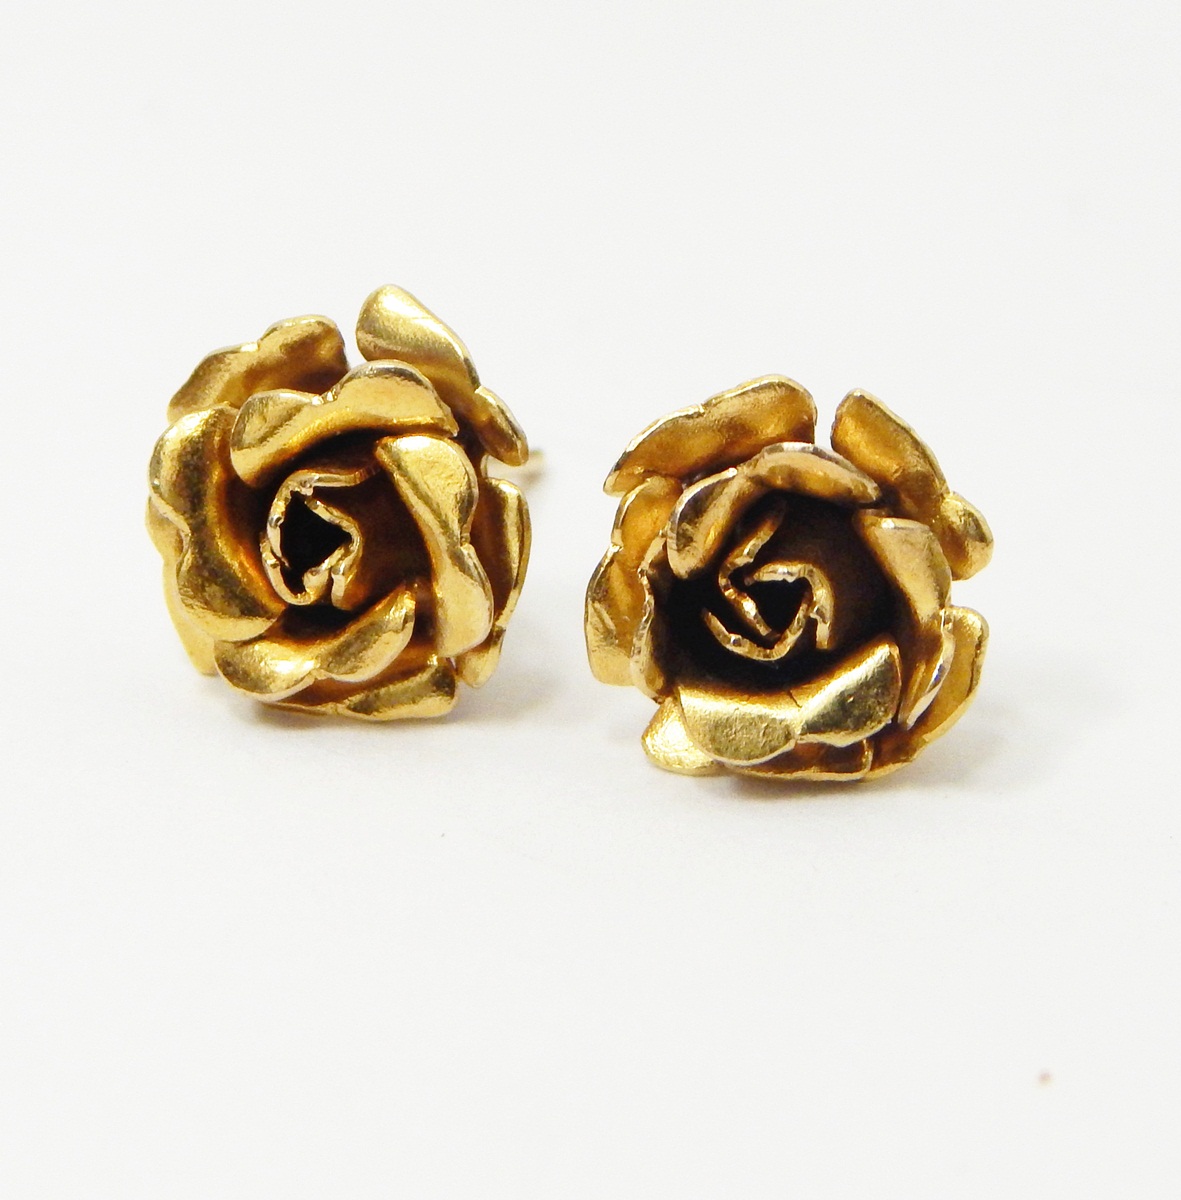 Pair of 9ct gold stud earrings, modelled as roses, approx. 2.